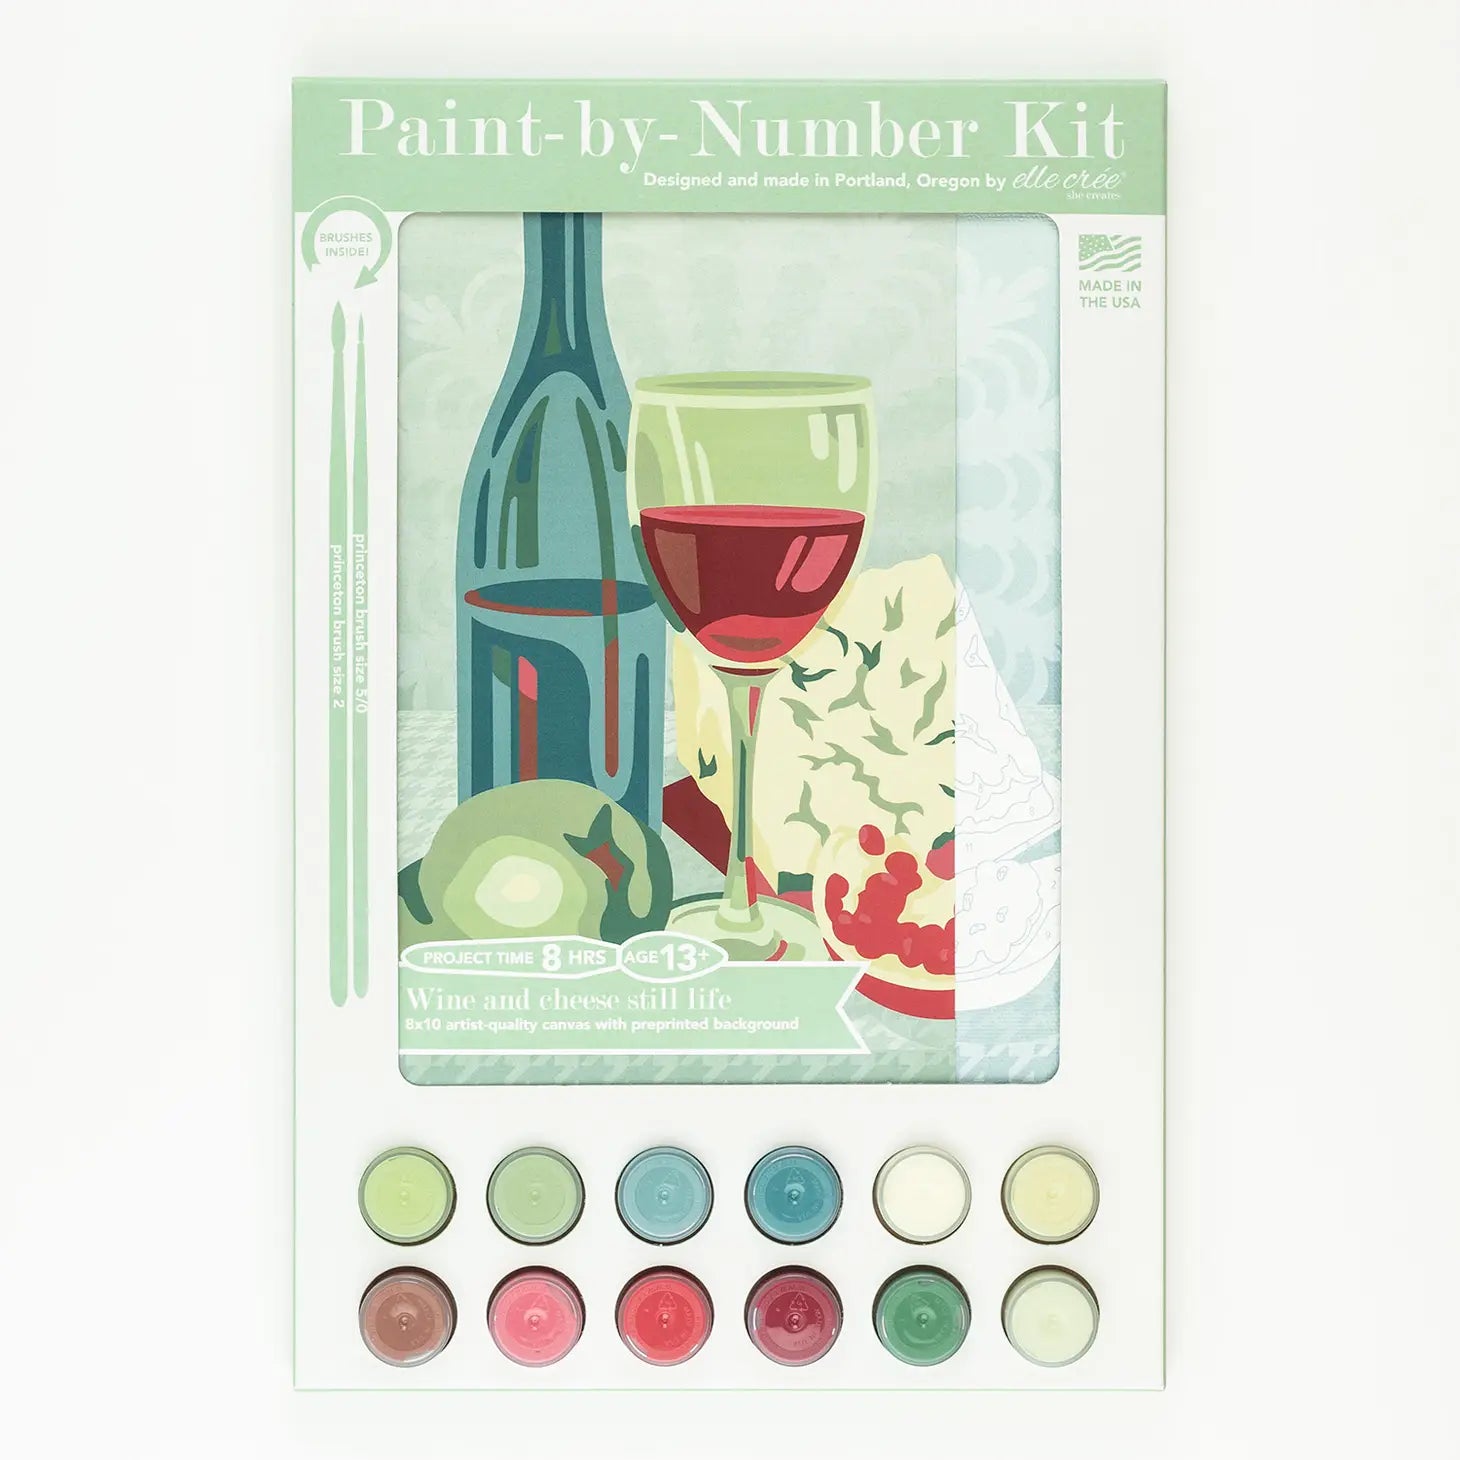 Wine & Cheese Still Life Paint-By-Number Kit